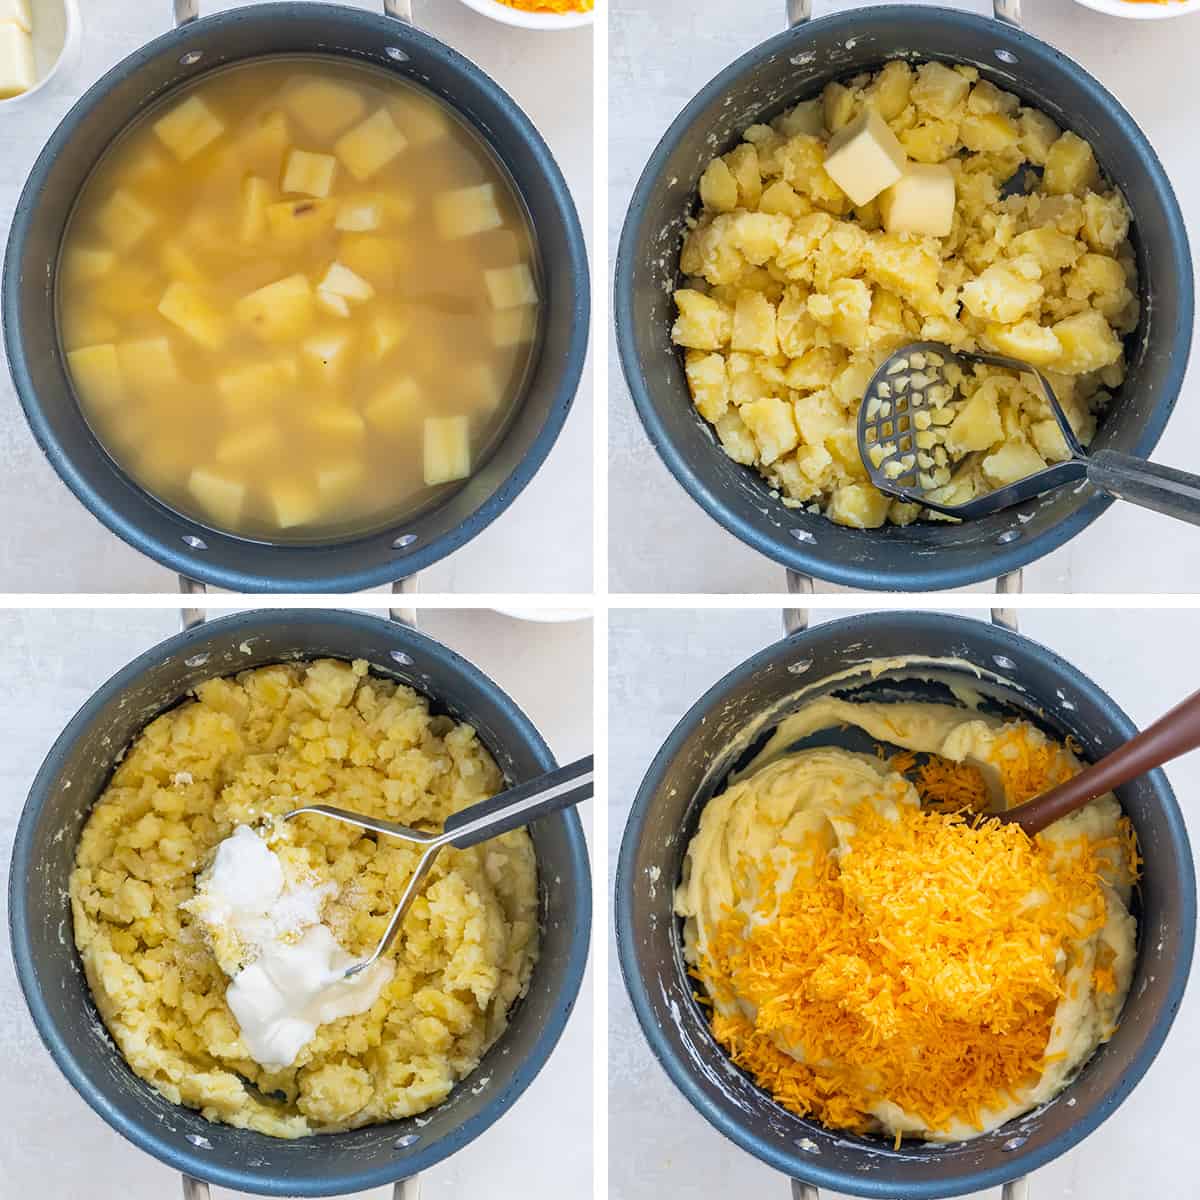 Four images of chopped potatoes in a pot with liquid then being mashed with sour cream and cheese.